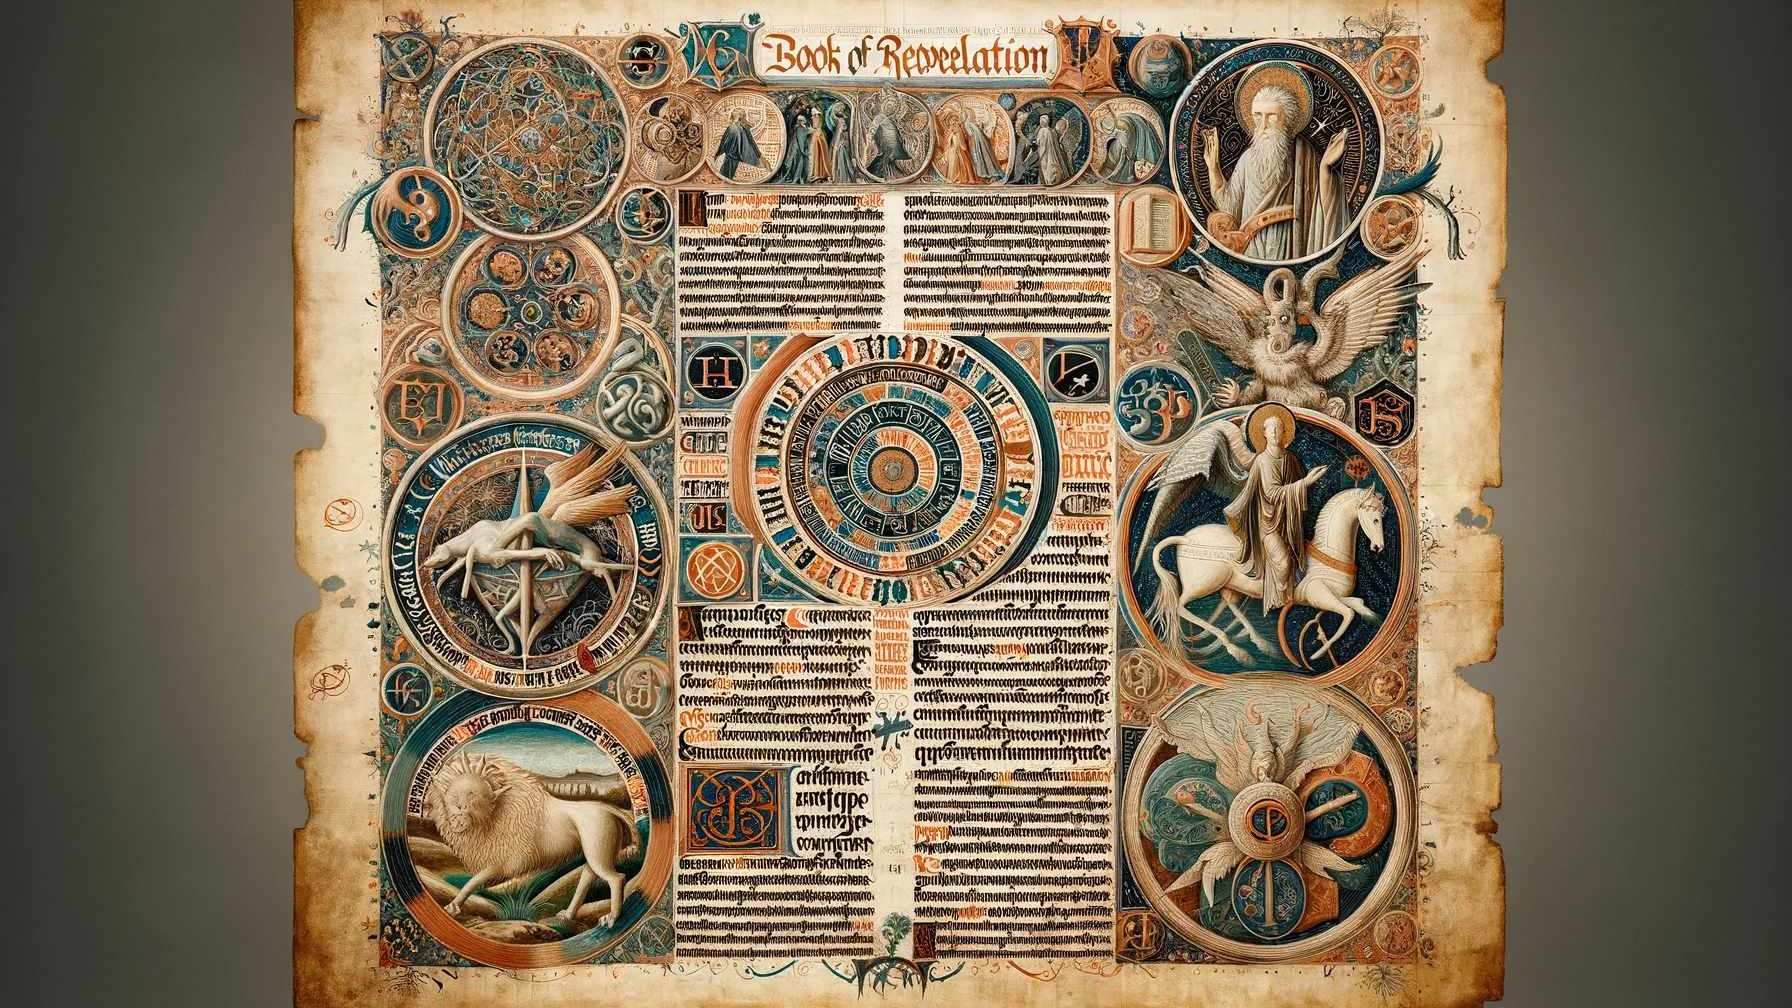 What Does The Book Of Revelation Mean?